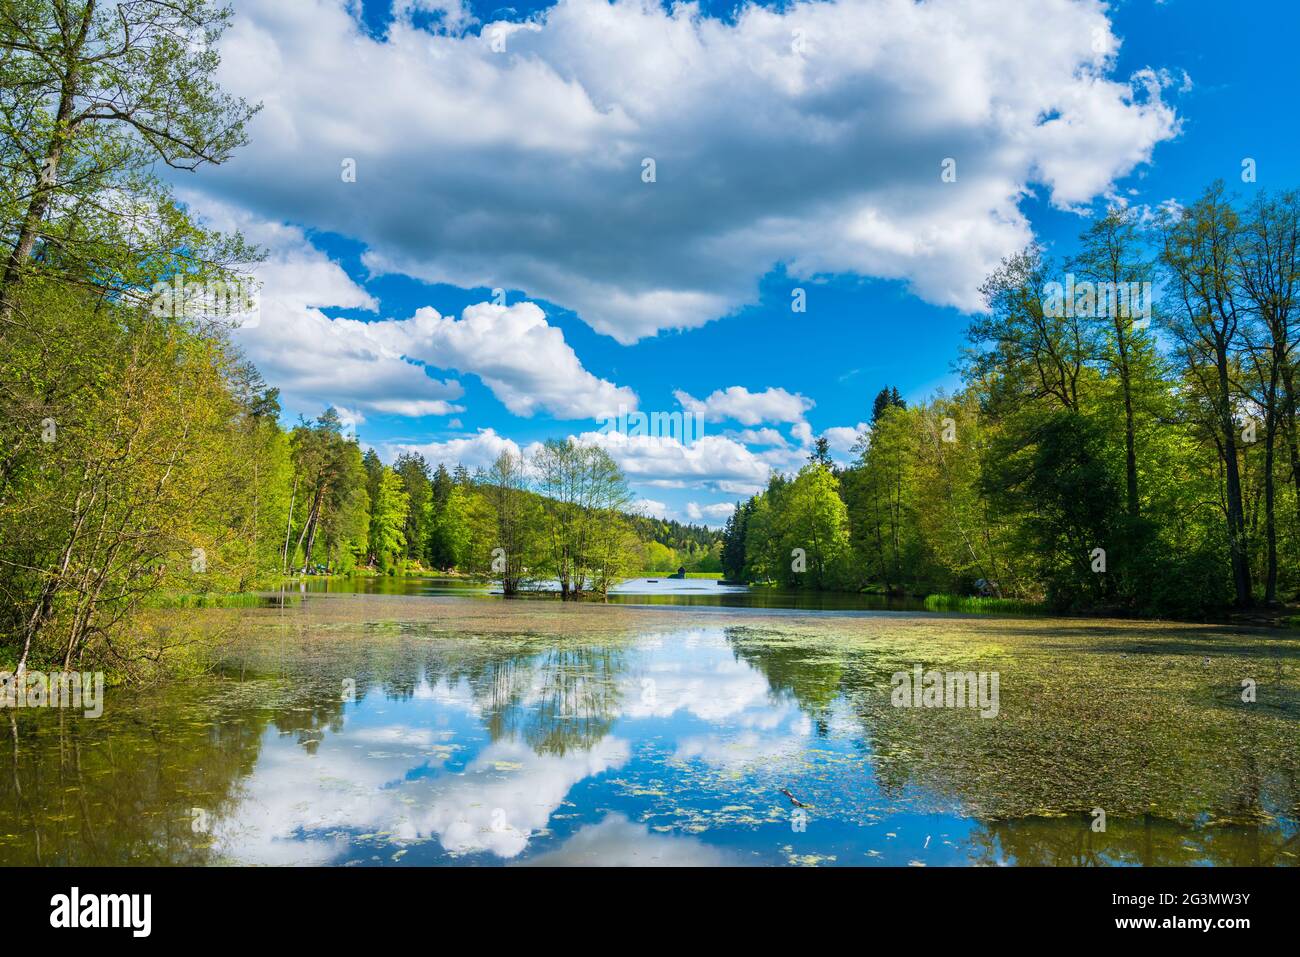 Germany, Ebnisee lake water reflecting nature landscape of  forest and trees in swabian forest near kaisersbach and welzheim in summer Stock Photo